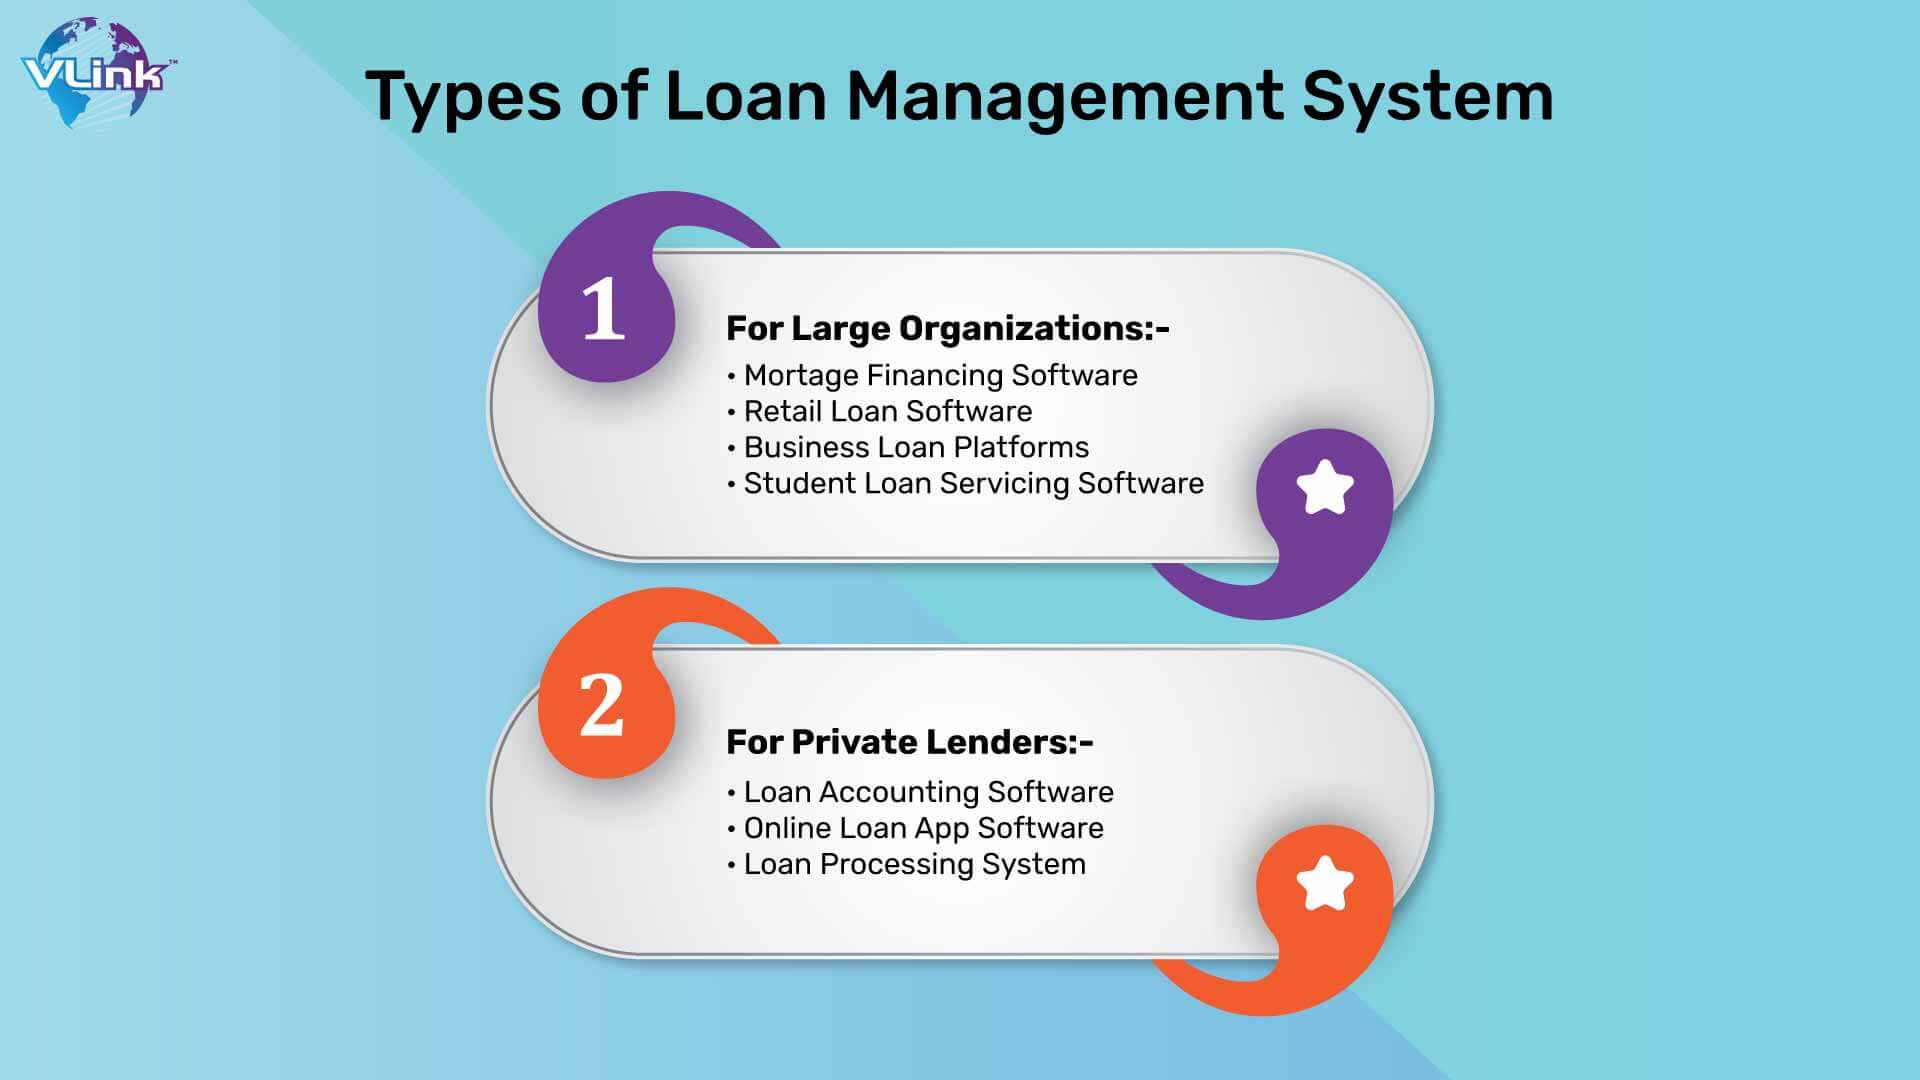 Types of loan management systems are shown below image